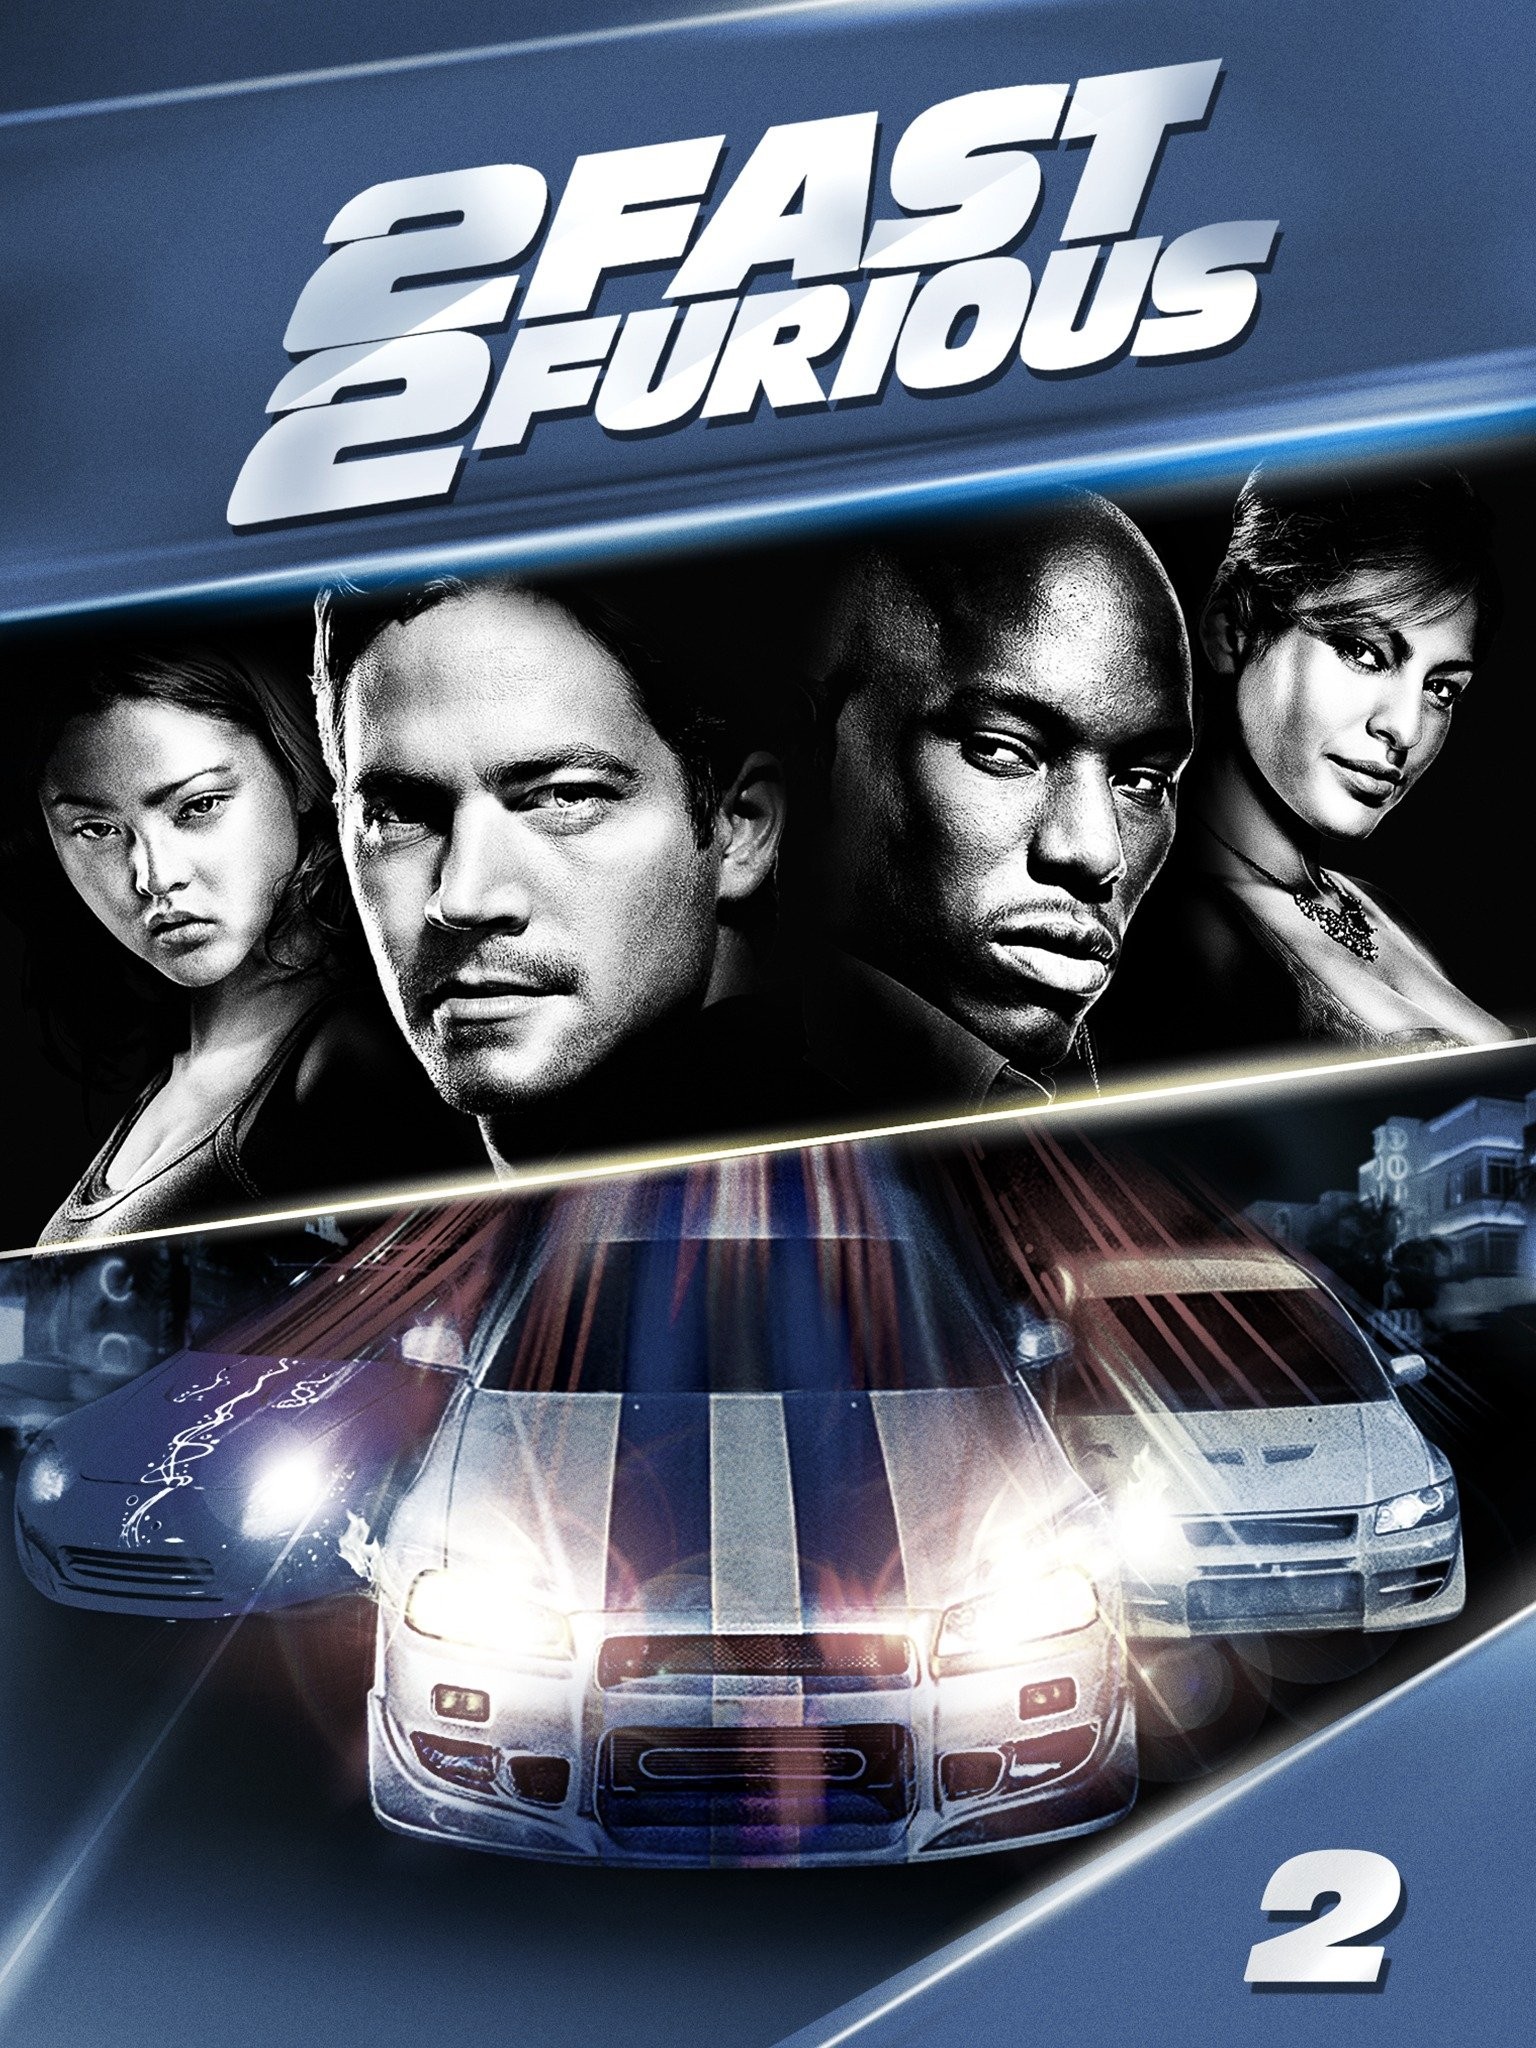 2fast 2furious Movie Poster Paul Walker Poster Fast The Furious